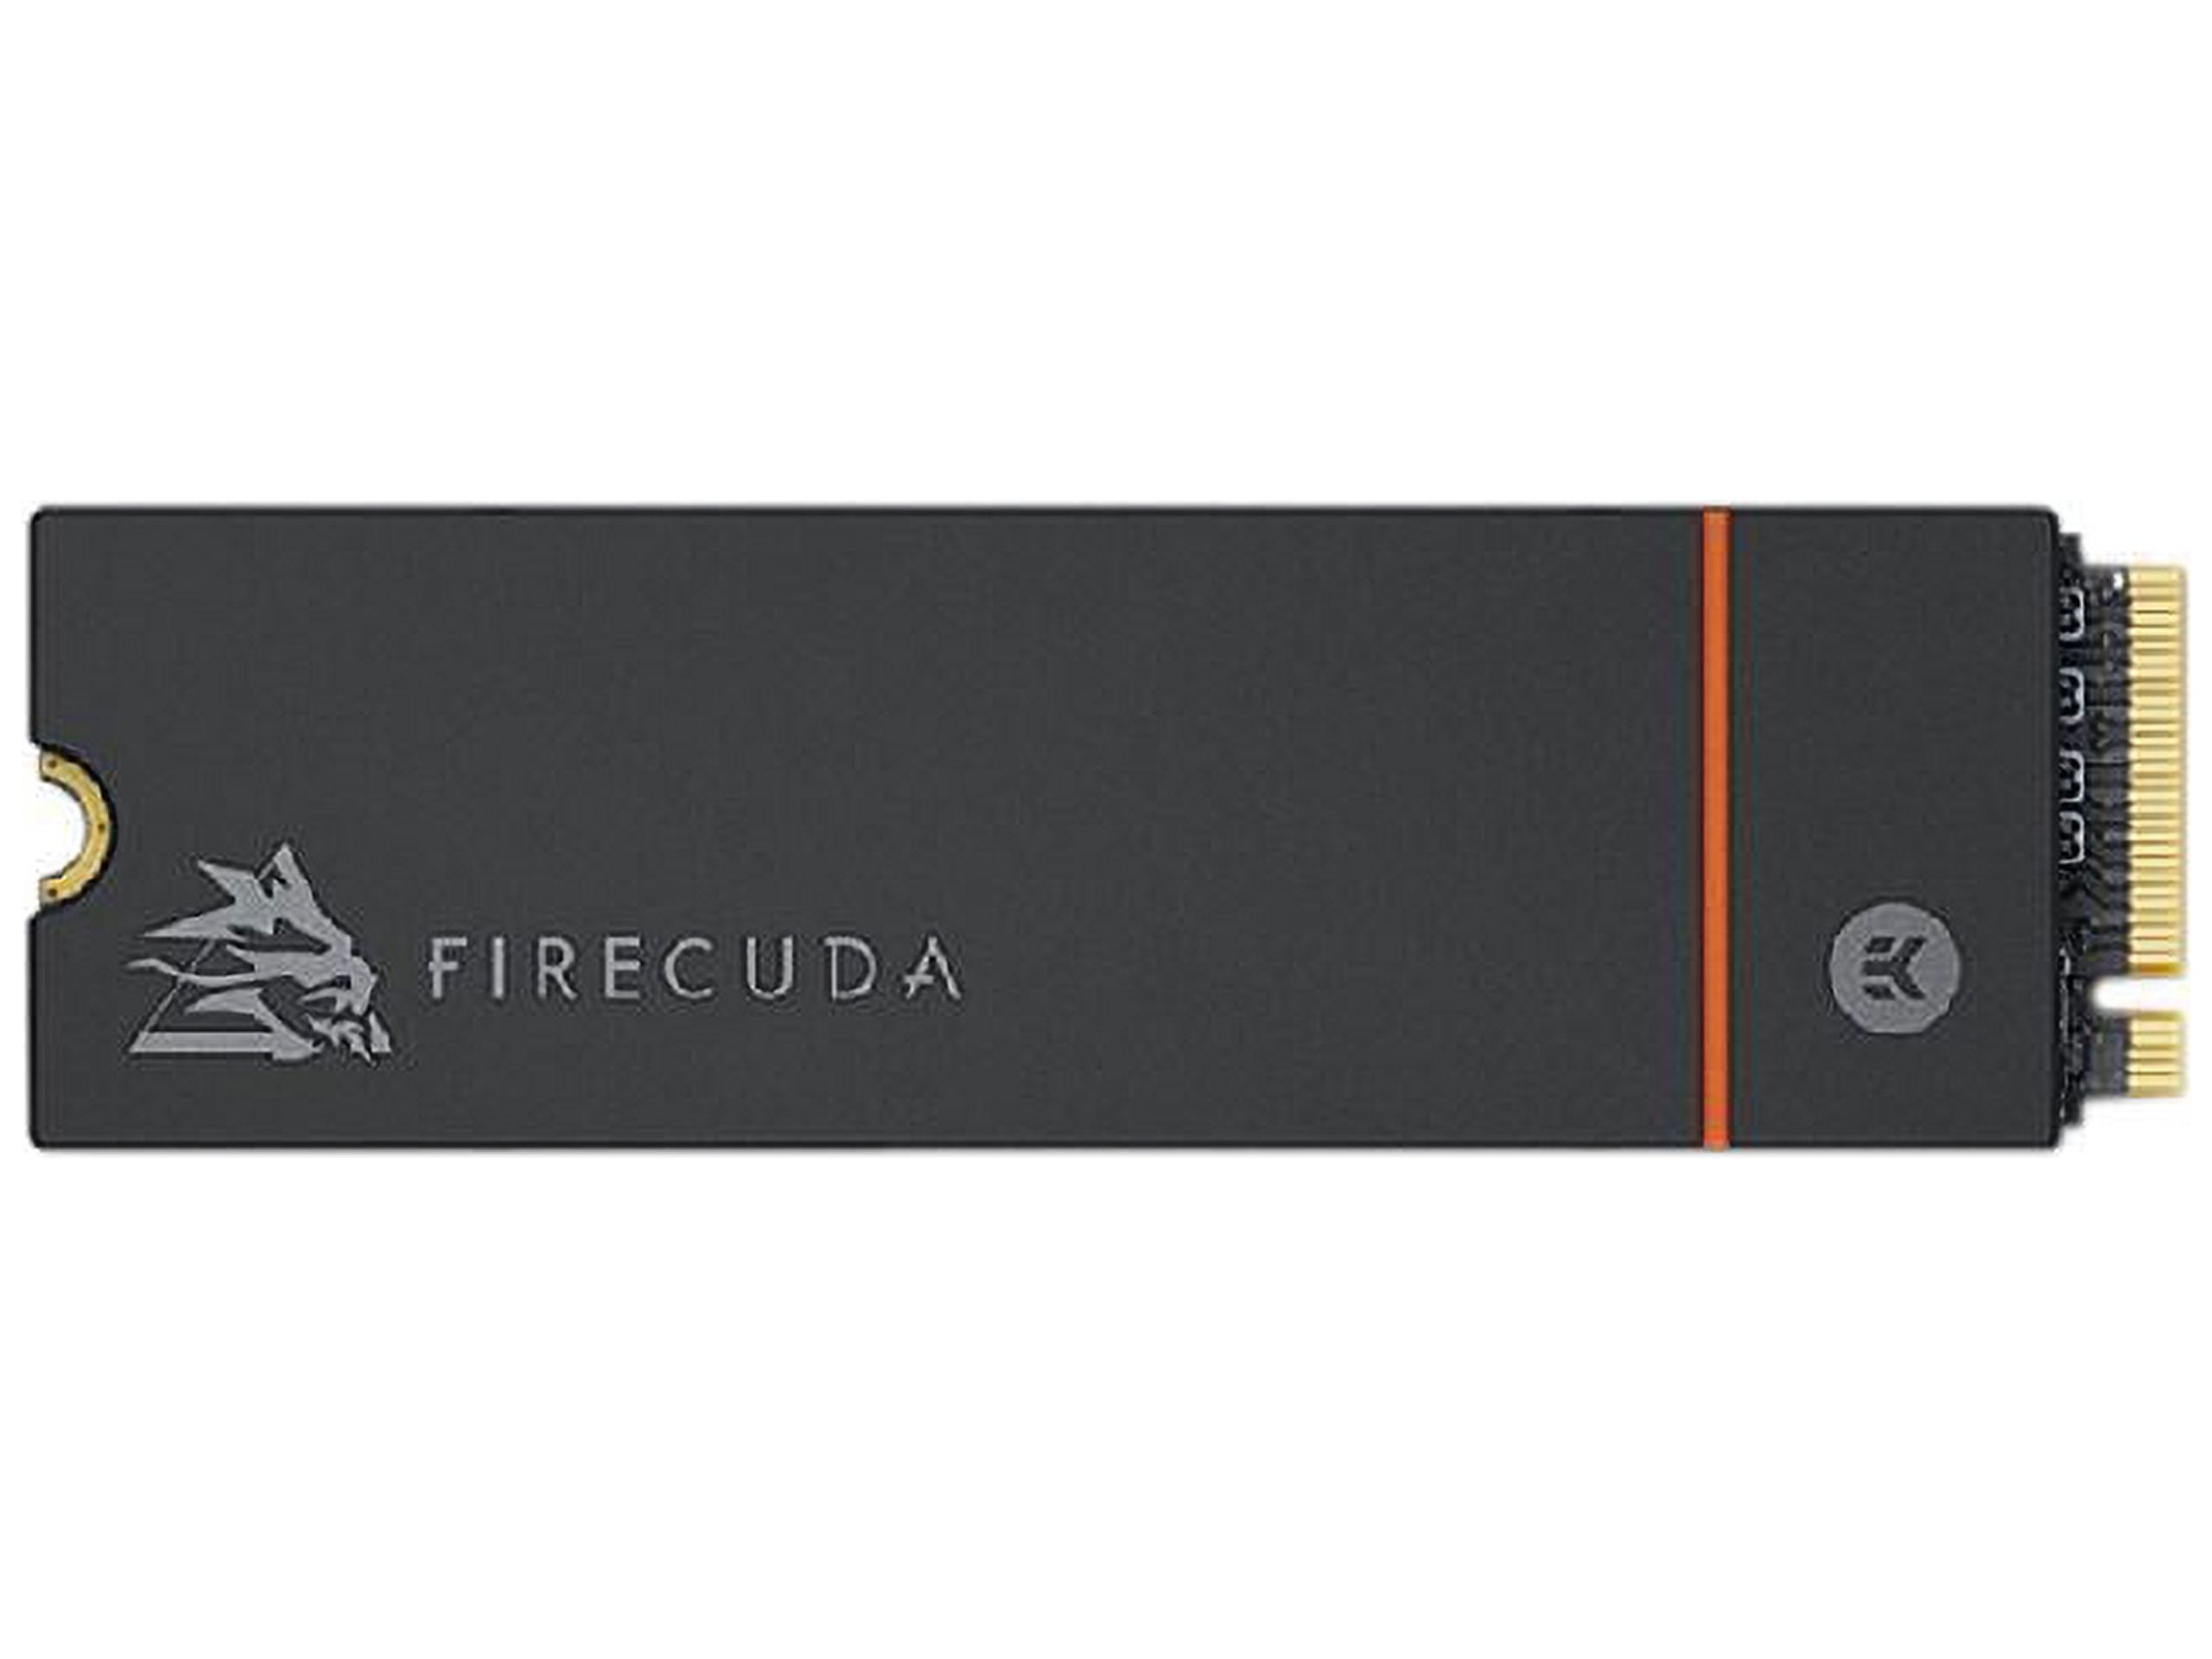 Seagate FireCuda 530 M.2 2280 4TB PCIe Gen4 x4 NVMe 1.4 3D NAND Internal Solid State Drive (SSD) ZP4000GM3A023 - image 1 of 5